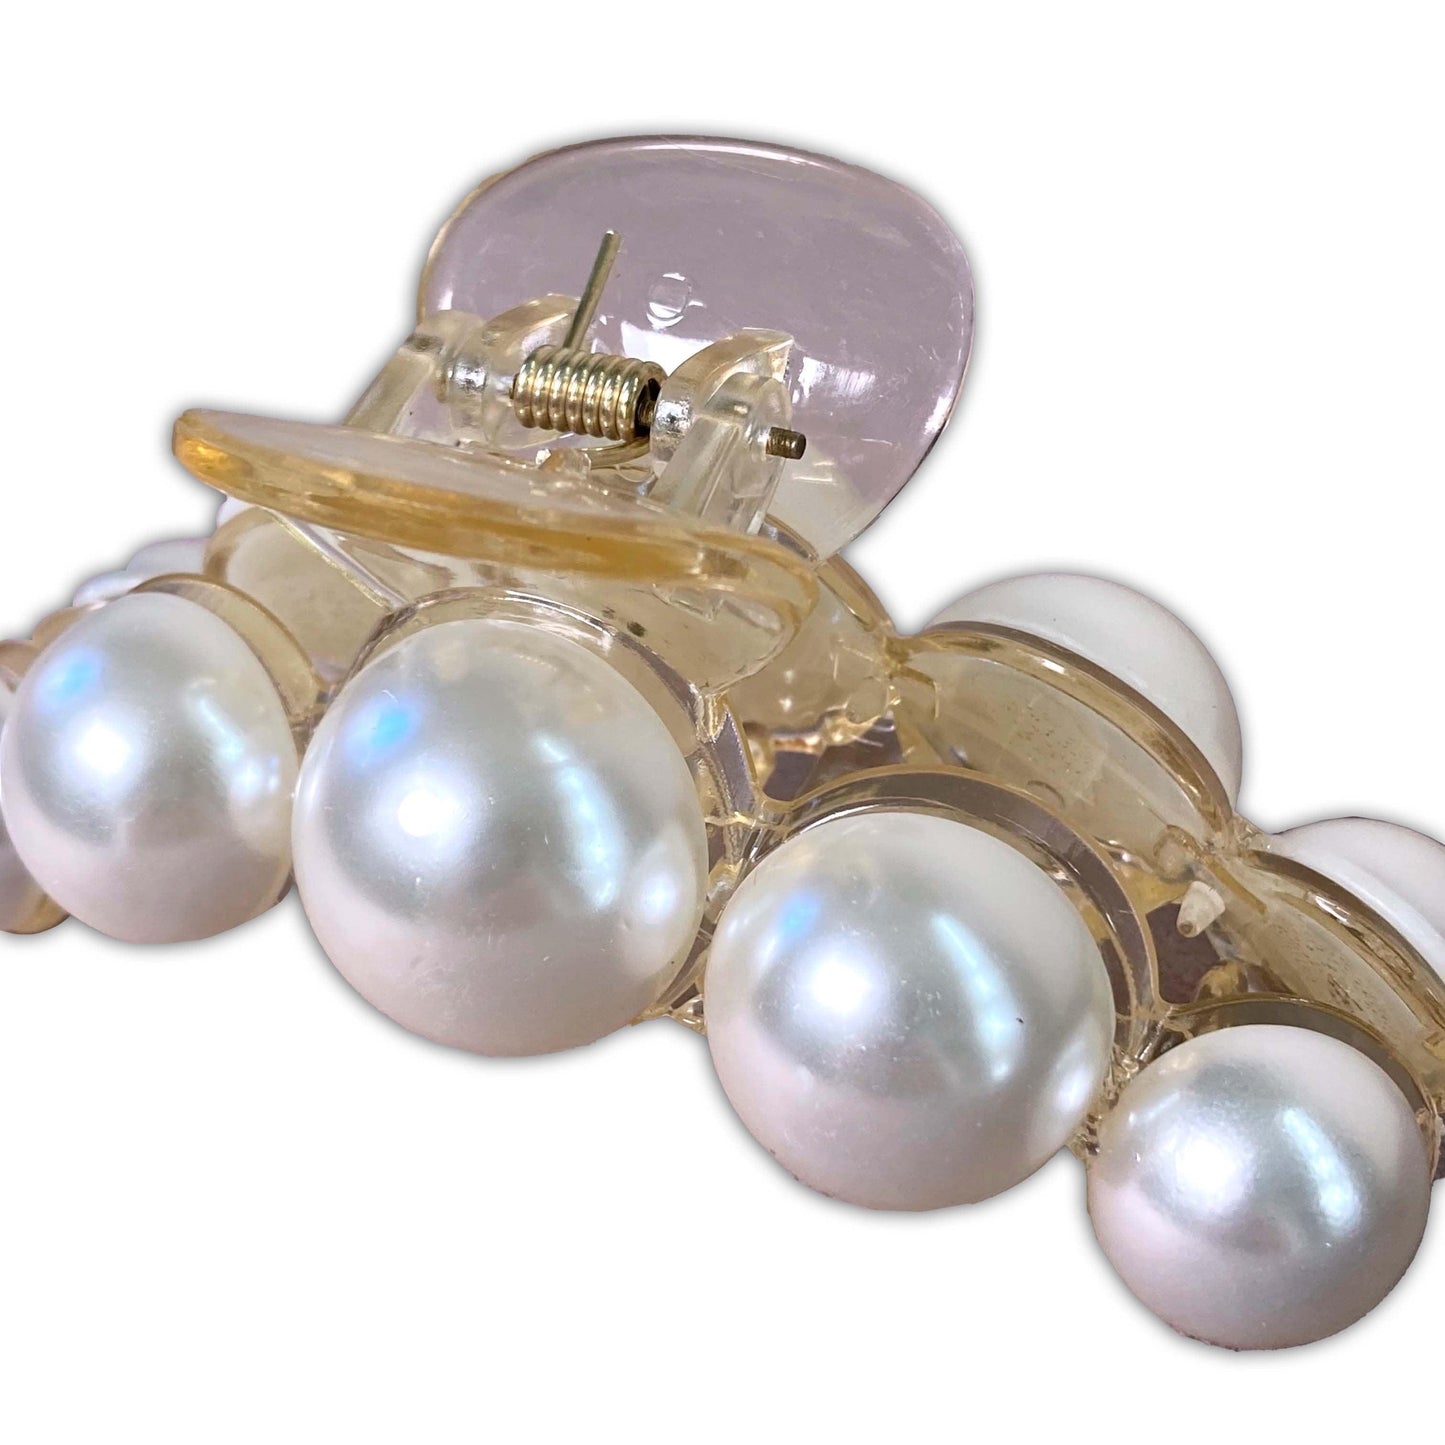 Luxury and elegant hair clip embellished with pearls and supported by a sturdy, golden frame